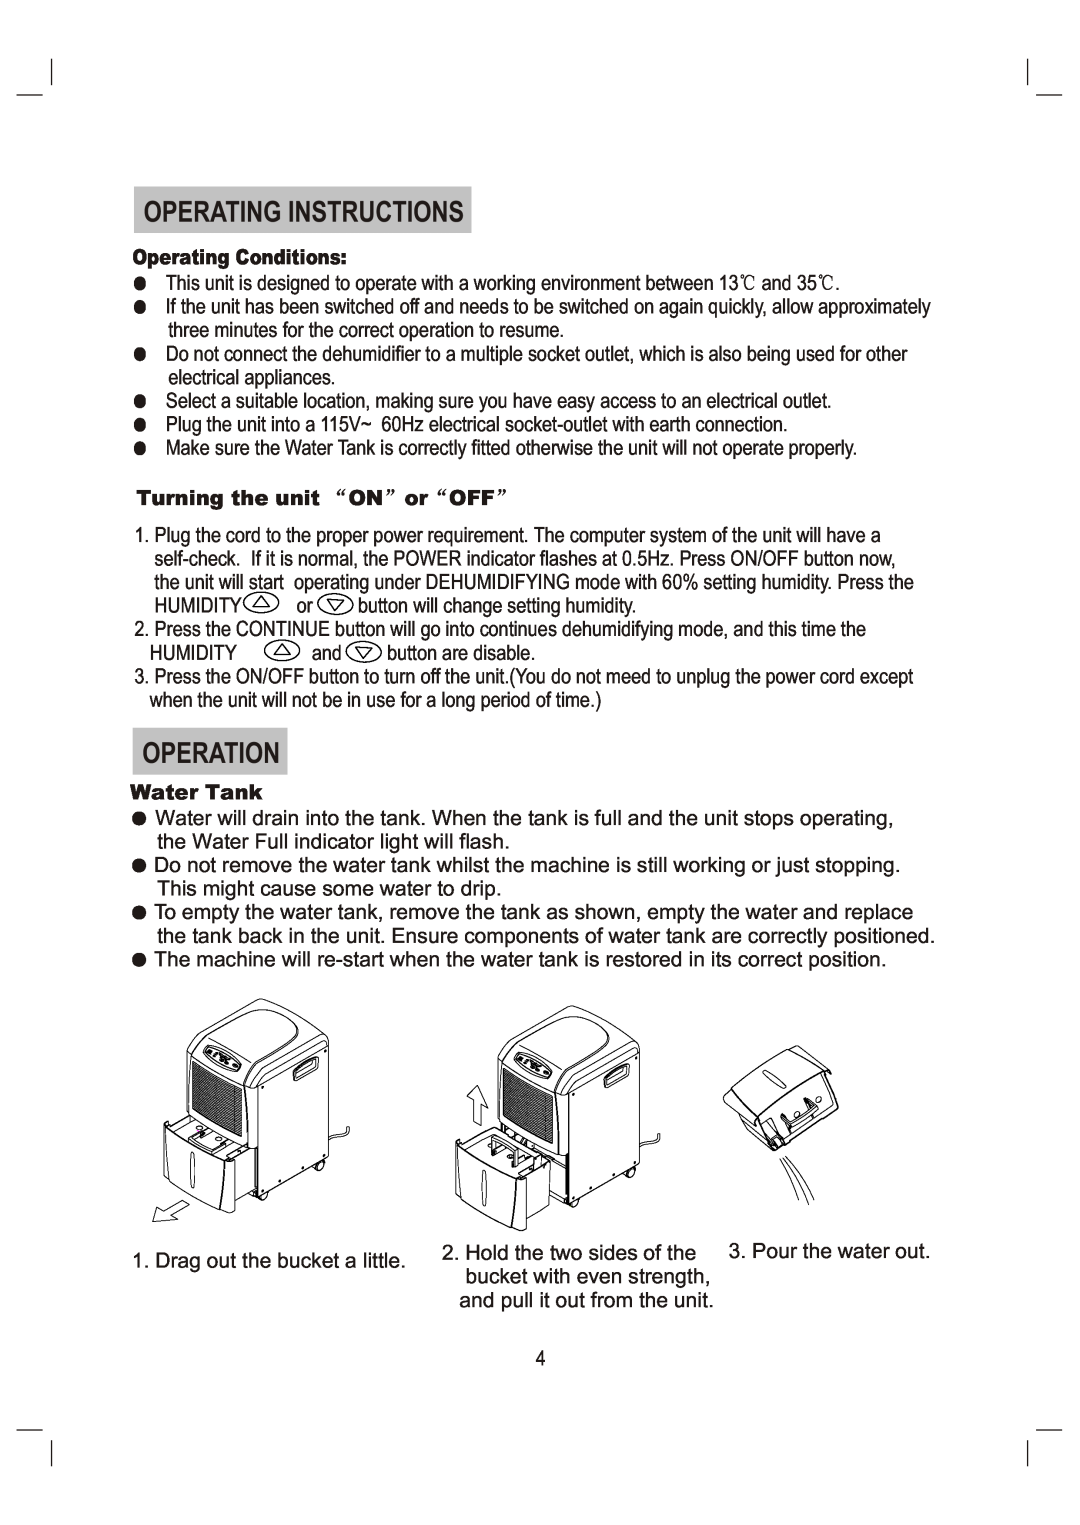 Daewoo DHC-600, DHC-250 Operating Instructions, Operation, Operating Conditions, Turning the unit ON or OFF, Water Tank 